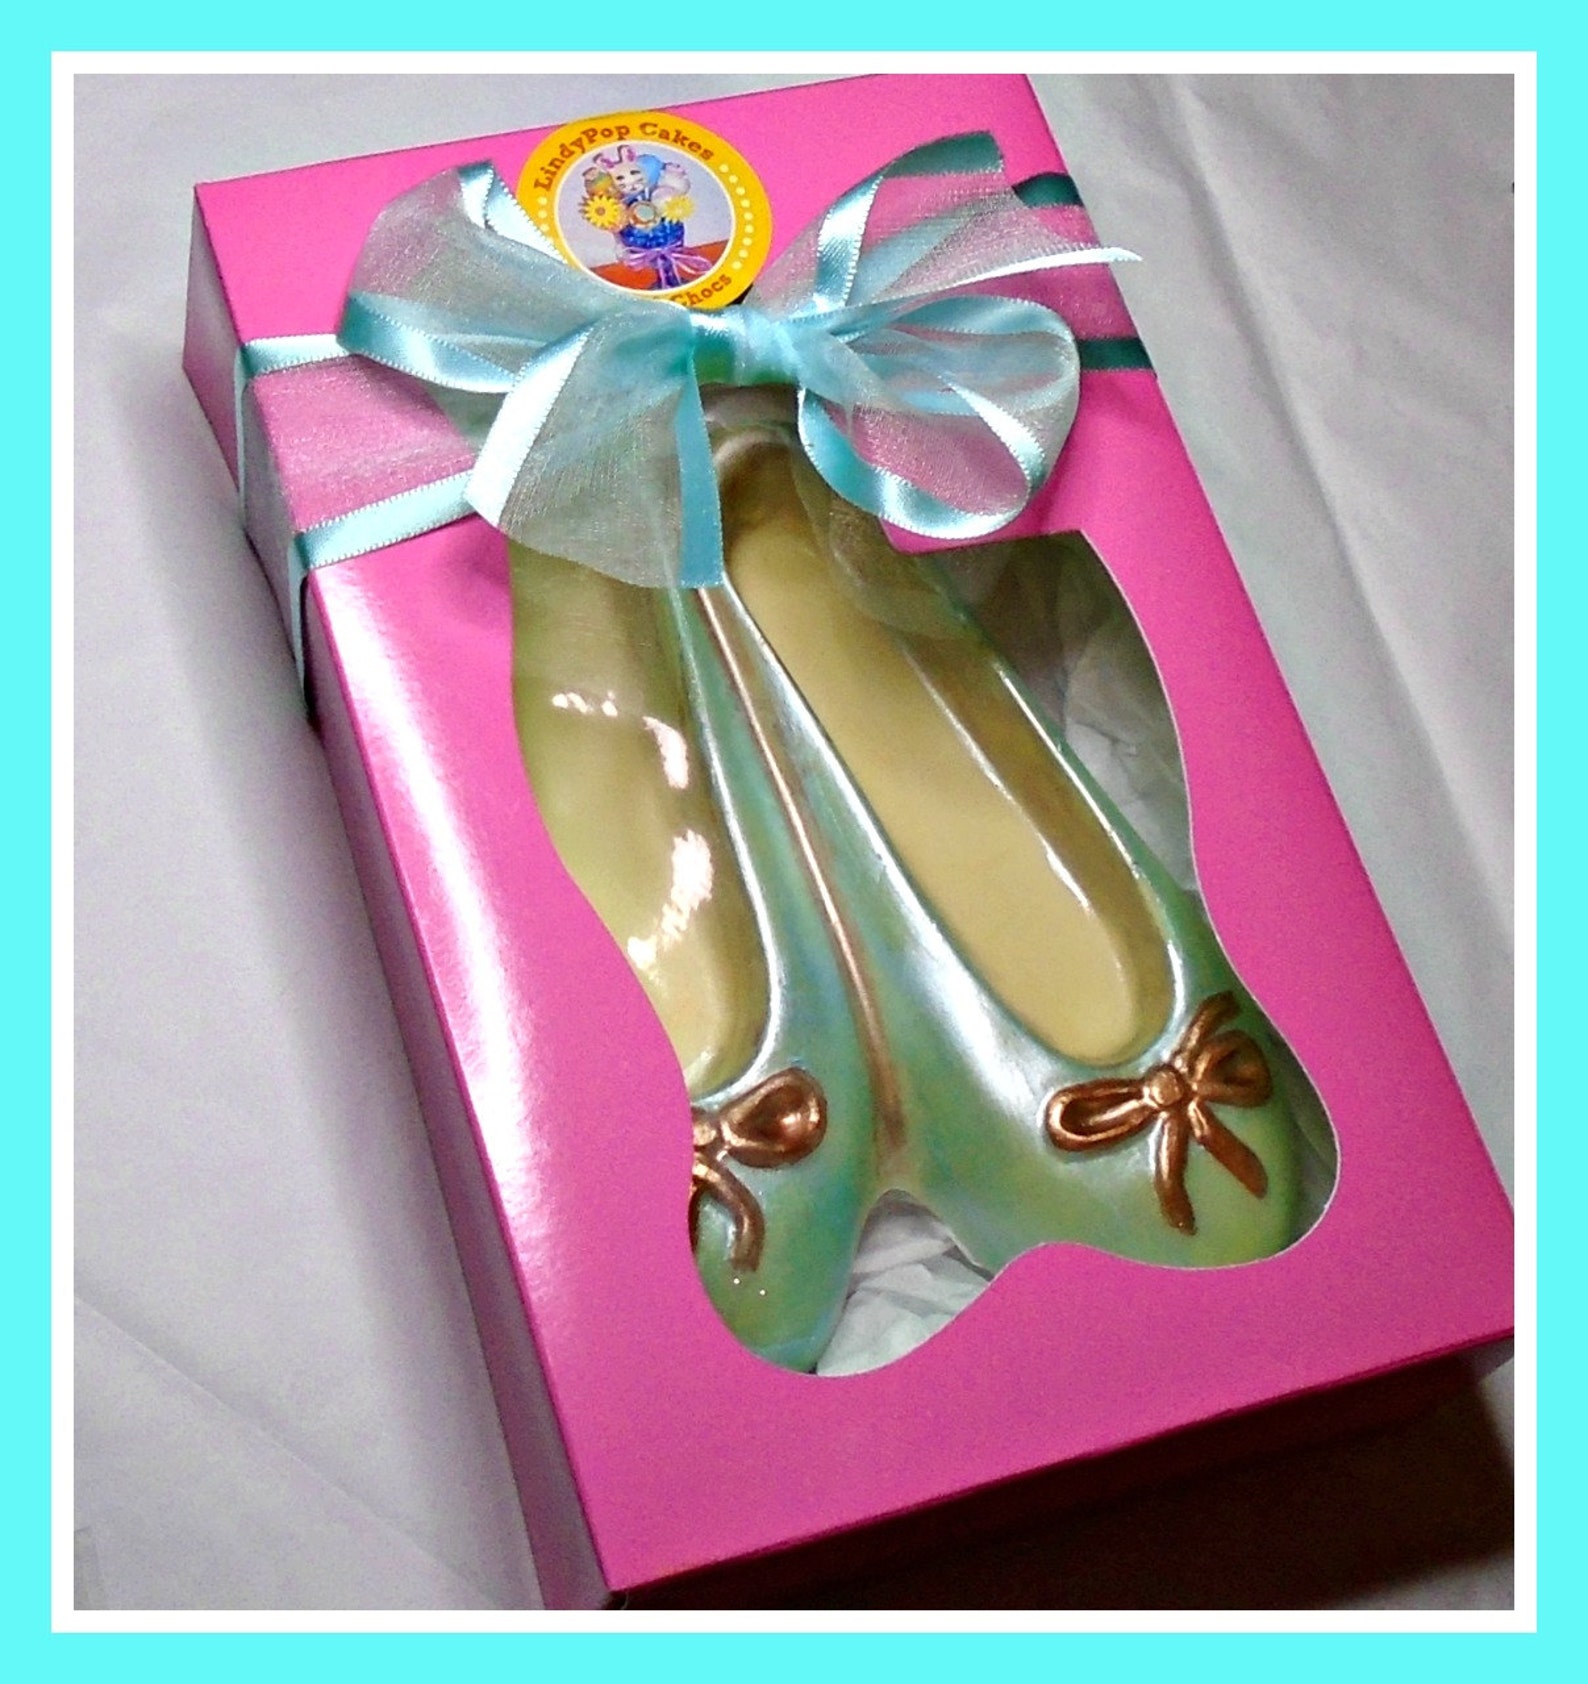 chocolate shoes/ballet pumps/edible shoes/ballet gift/female gift/girls birthday/flat shoes/ballet shoes/sister/mum/edible gift/